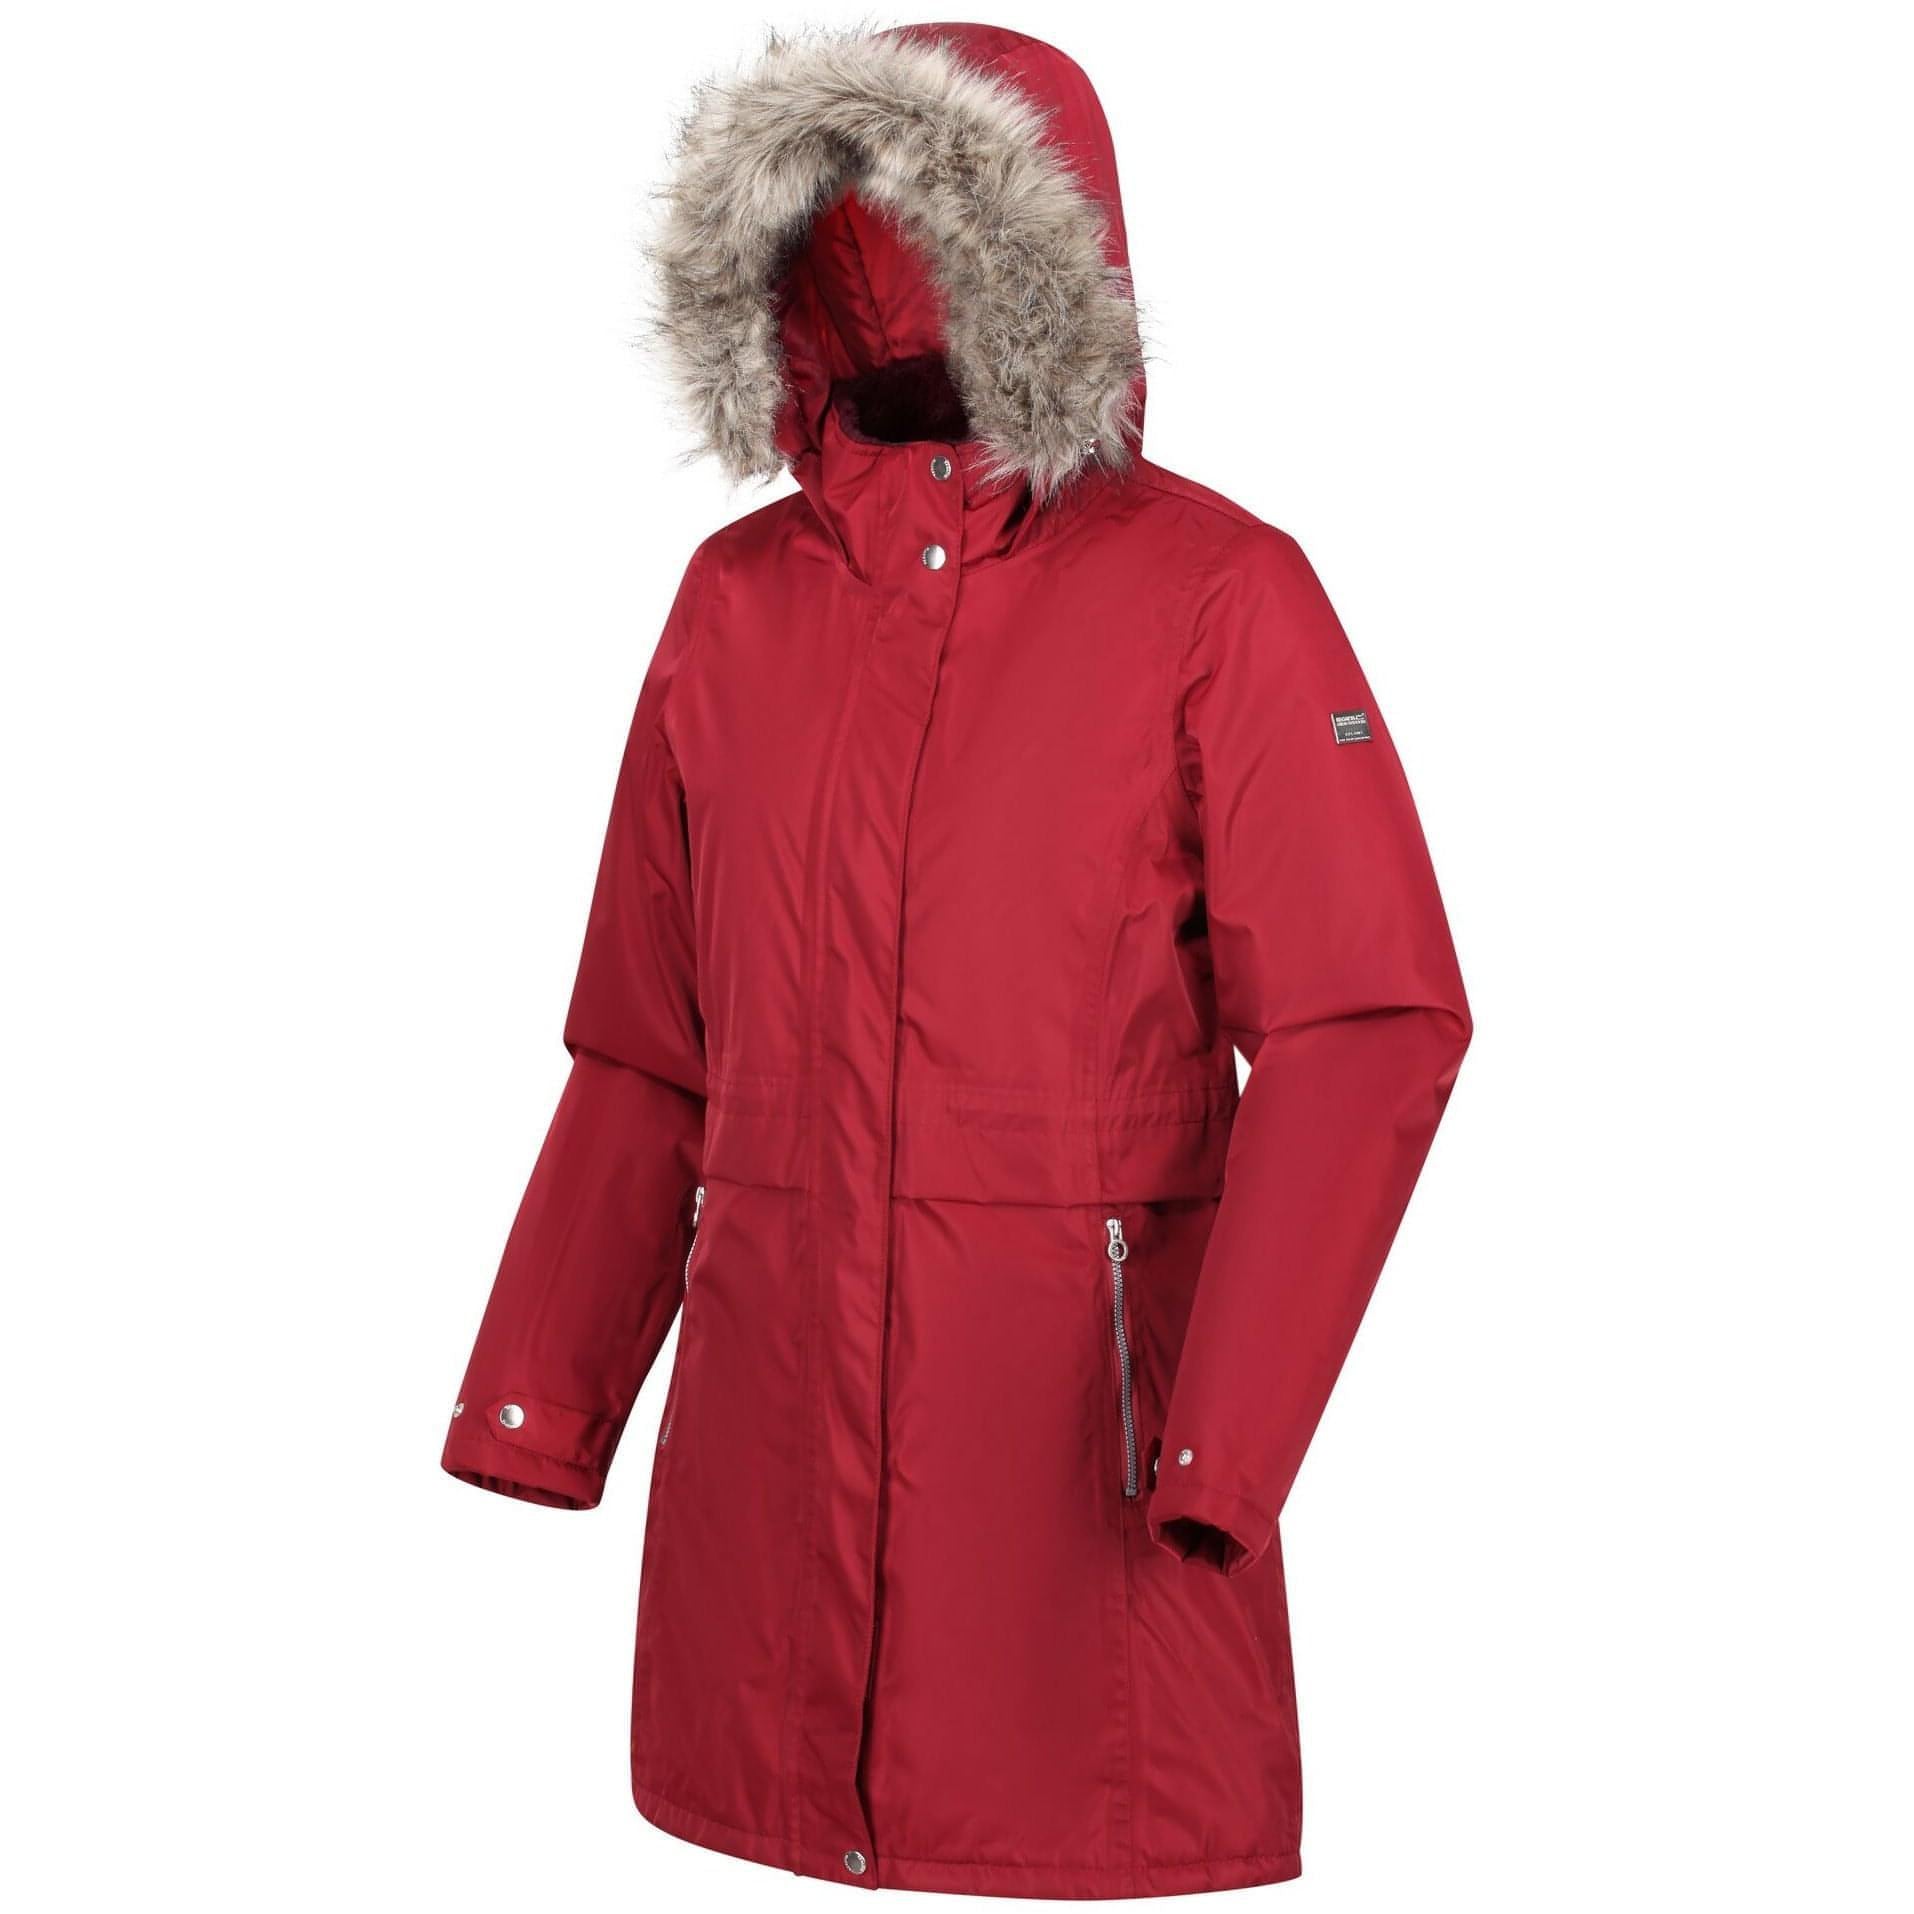 Regatta Lexis Waterproof Insulated Parka Jacket Rwp301 Front - Front View